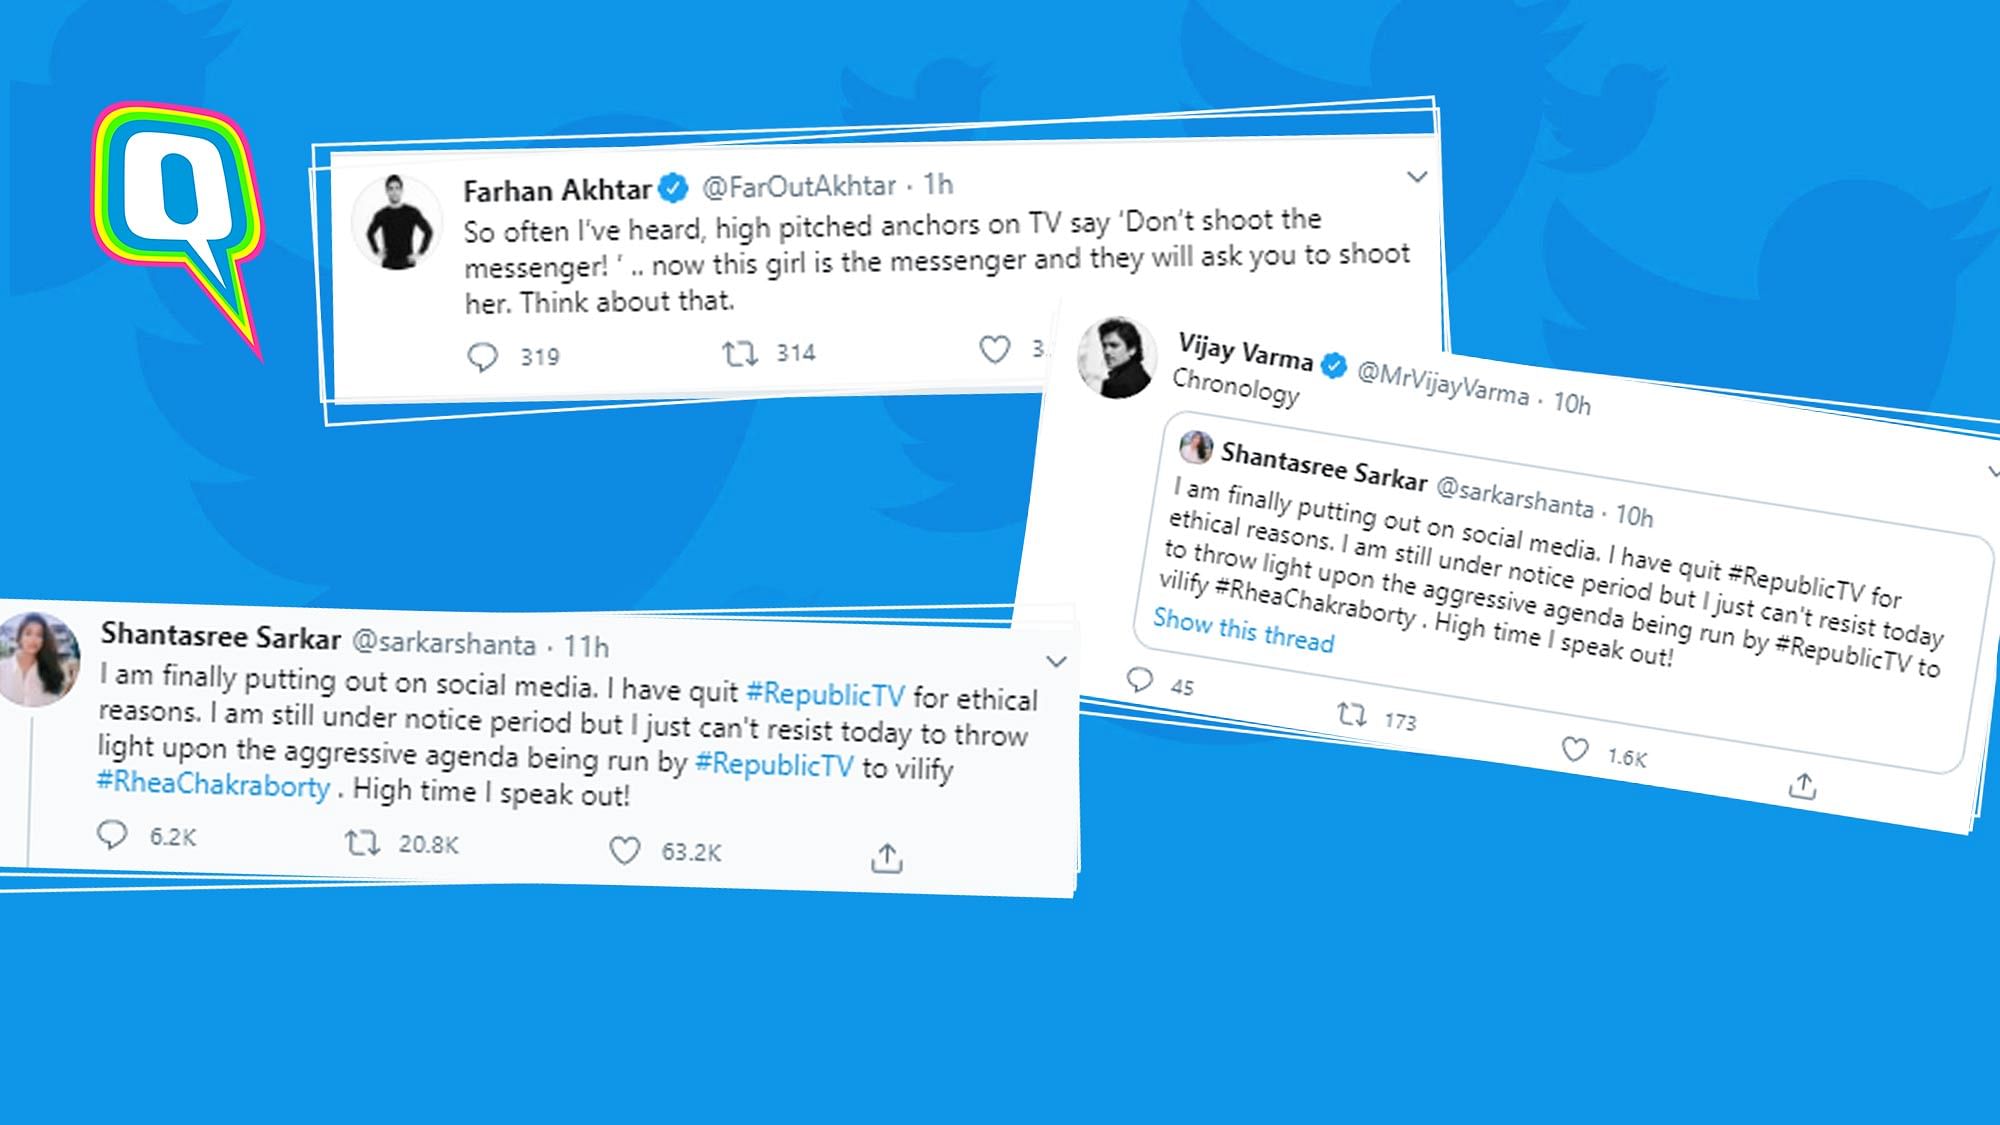 Twitter reacts to a journalist's announcement of resigning from Republic TV.